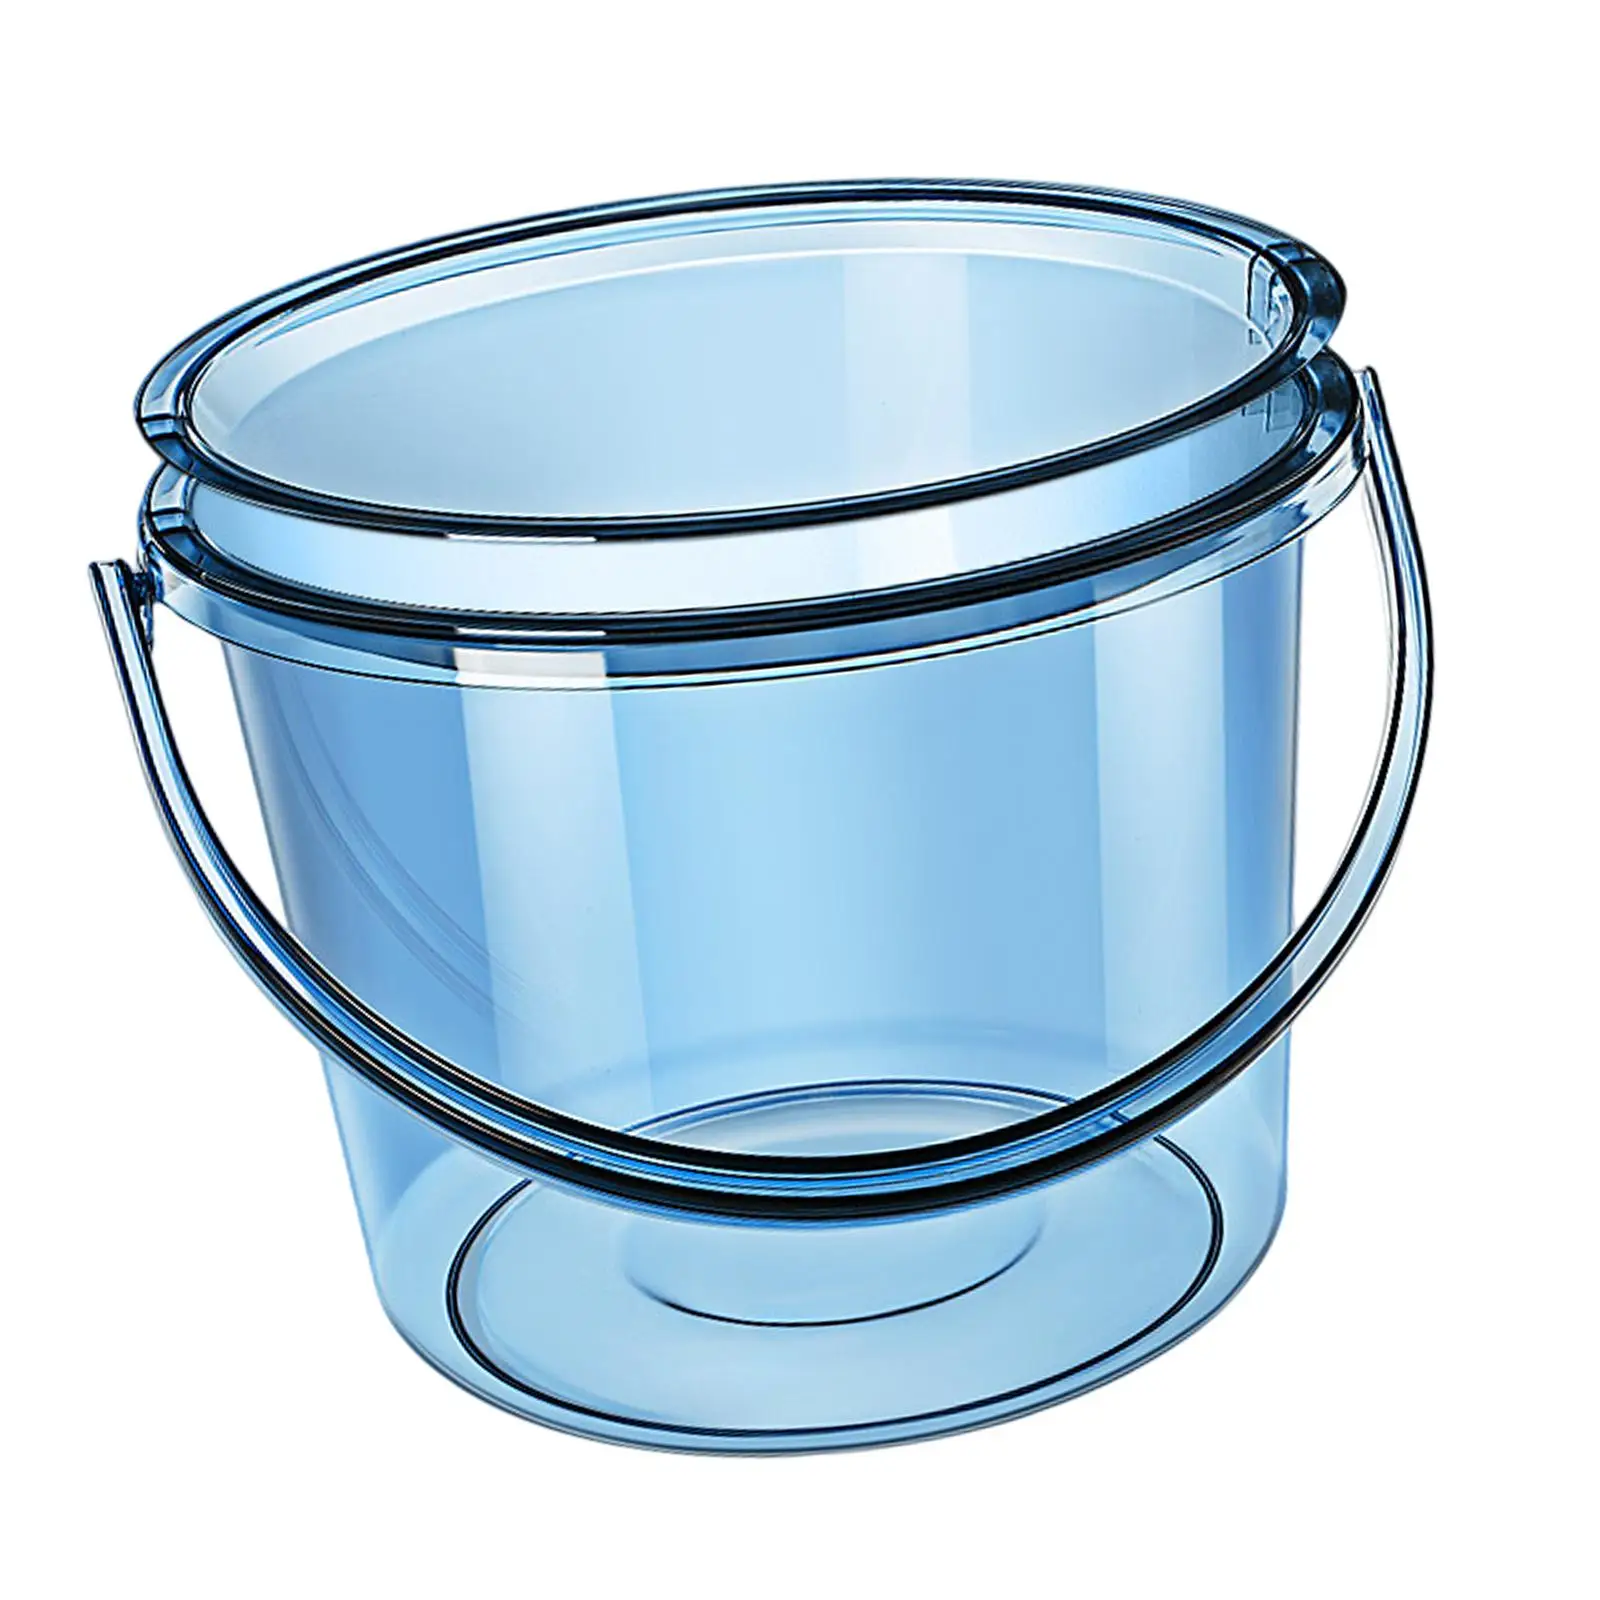 Water Bucket with Lid Fishing Bucket Cleaning Bucket for Household Use for Gardening